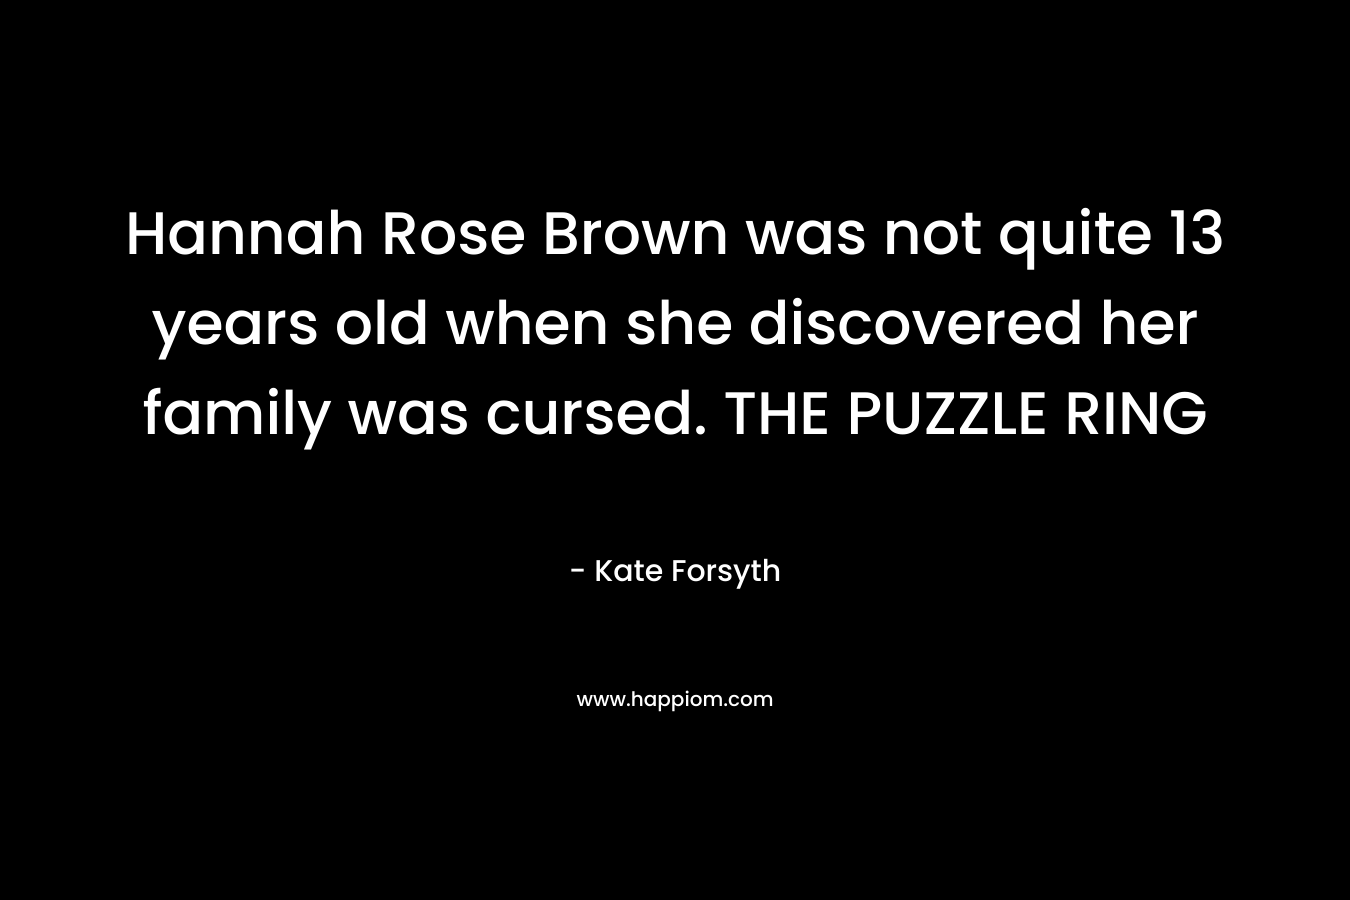 Hannah Rose Brown was not quite 13 years old when she discovered her family was cursed. THE PUZZLE RING